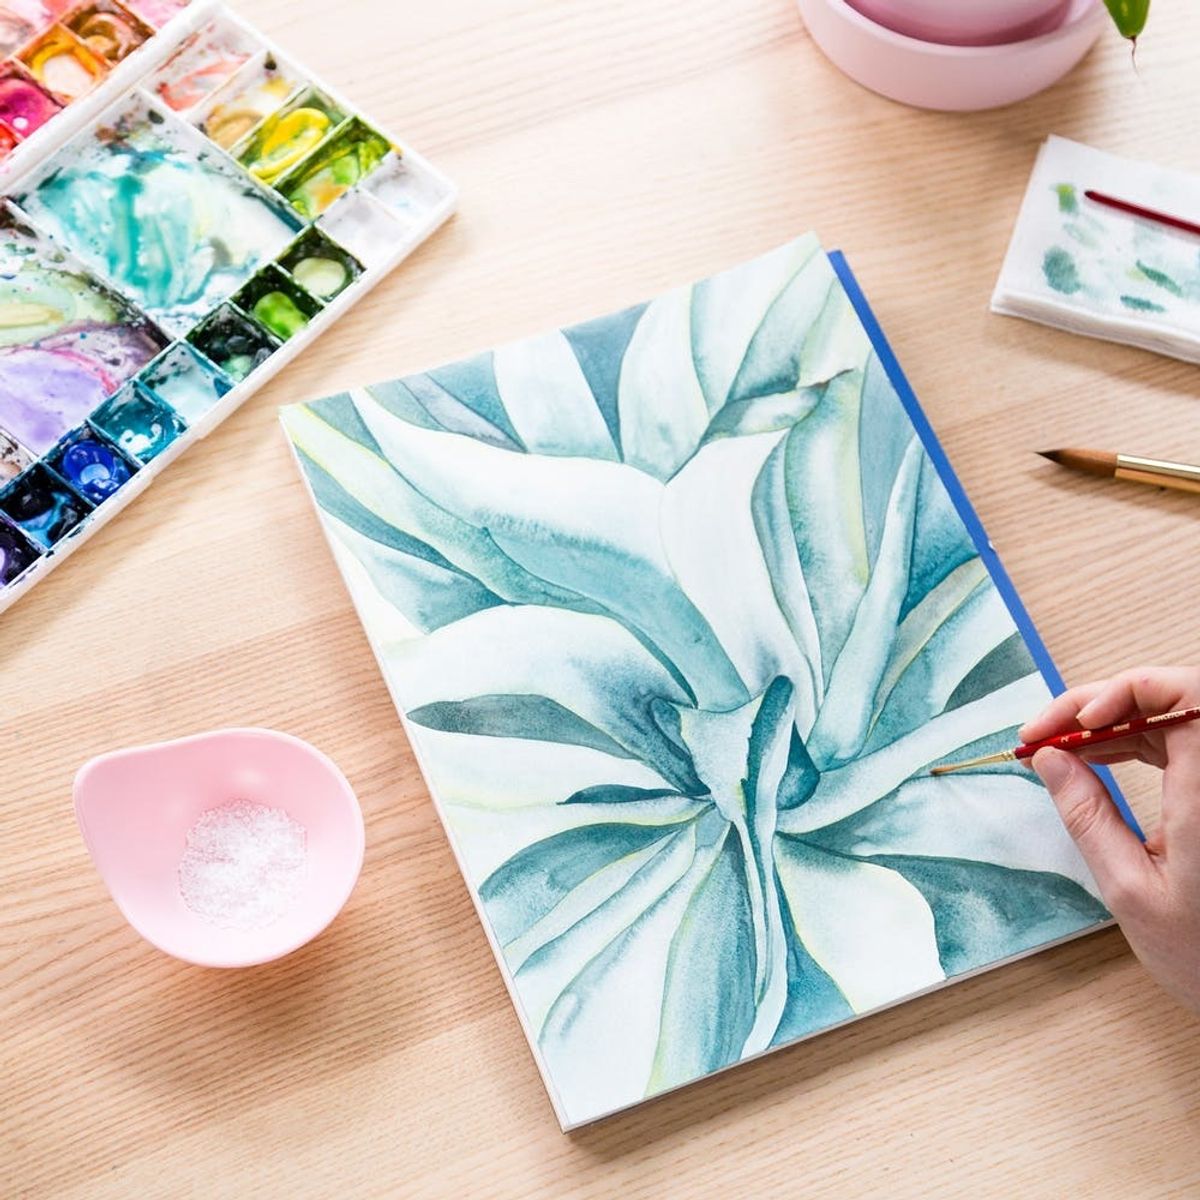 Our Brand-New Succulents Watercolor Class Is Total #PlantLadyGoals